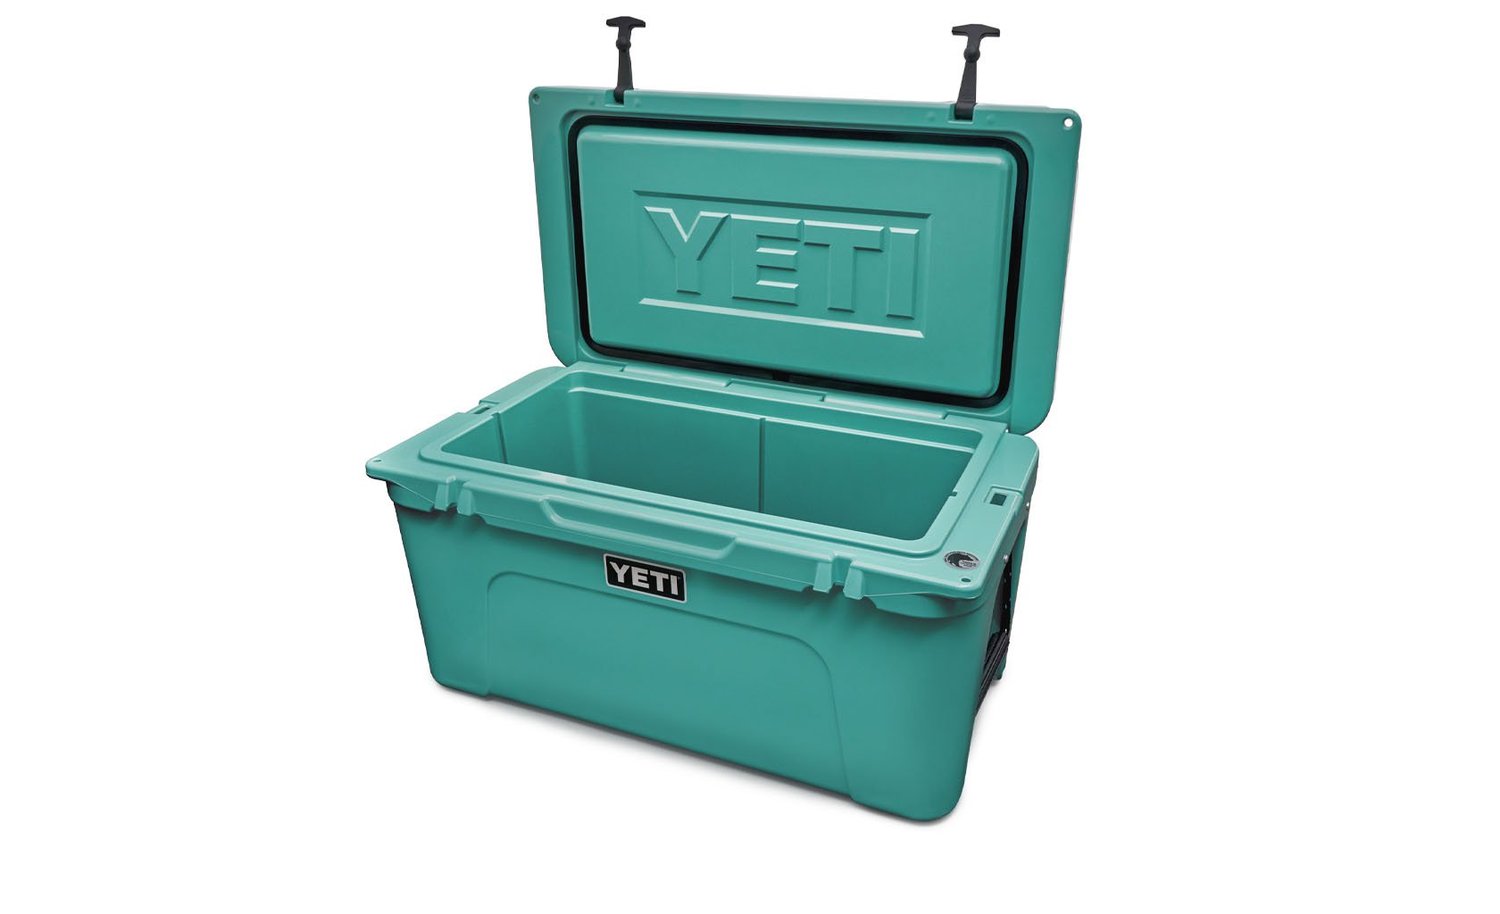 YETI LIMITED EDITION TUNDRA 65 HARD COOLER-RESCUE RED - The BBQ Allstars